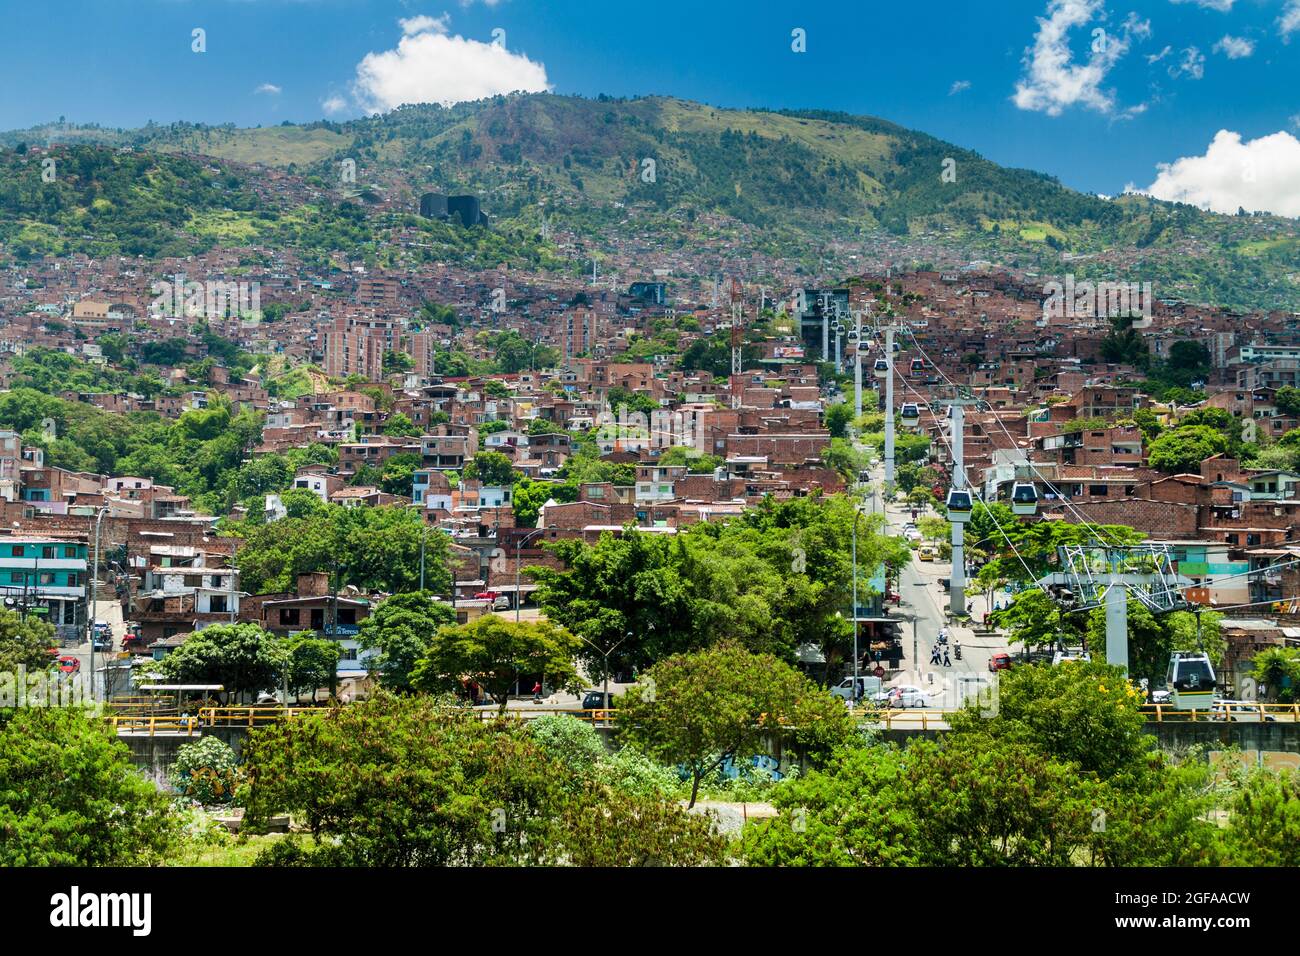 MEDELLIN, COLOMBIA - SEPTEMBER 4: Medellin cable car system connects poor neighborhoods in the hills around the city. Stock Photo